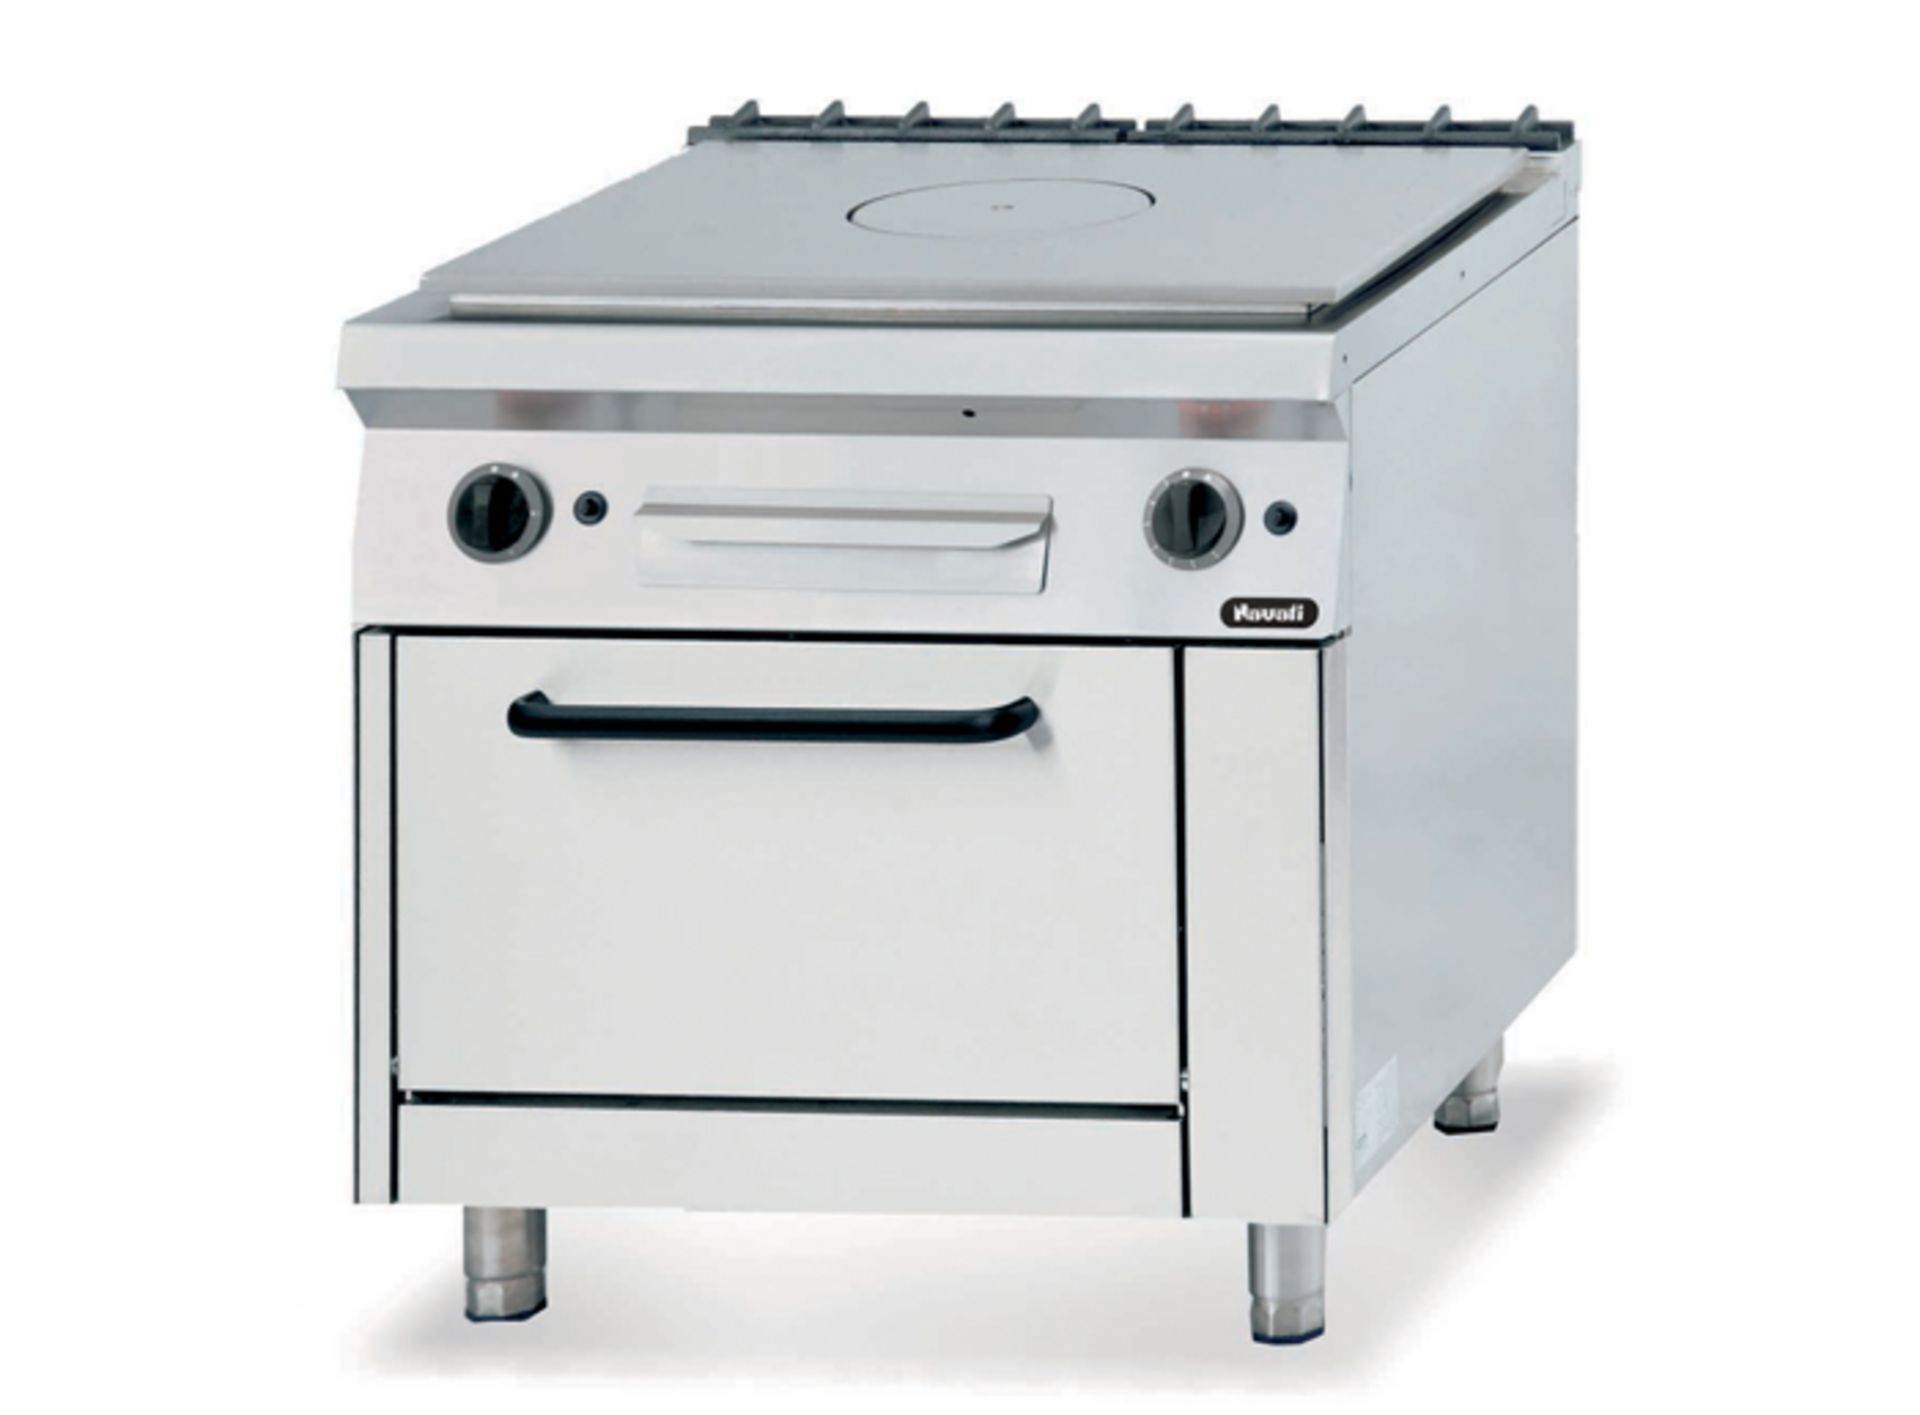 * NGHT 8-75 B MR Nayati Meritus Gas Hot Plate with Ring Burner and Oven Beneath 800 x 750 x 850/